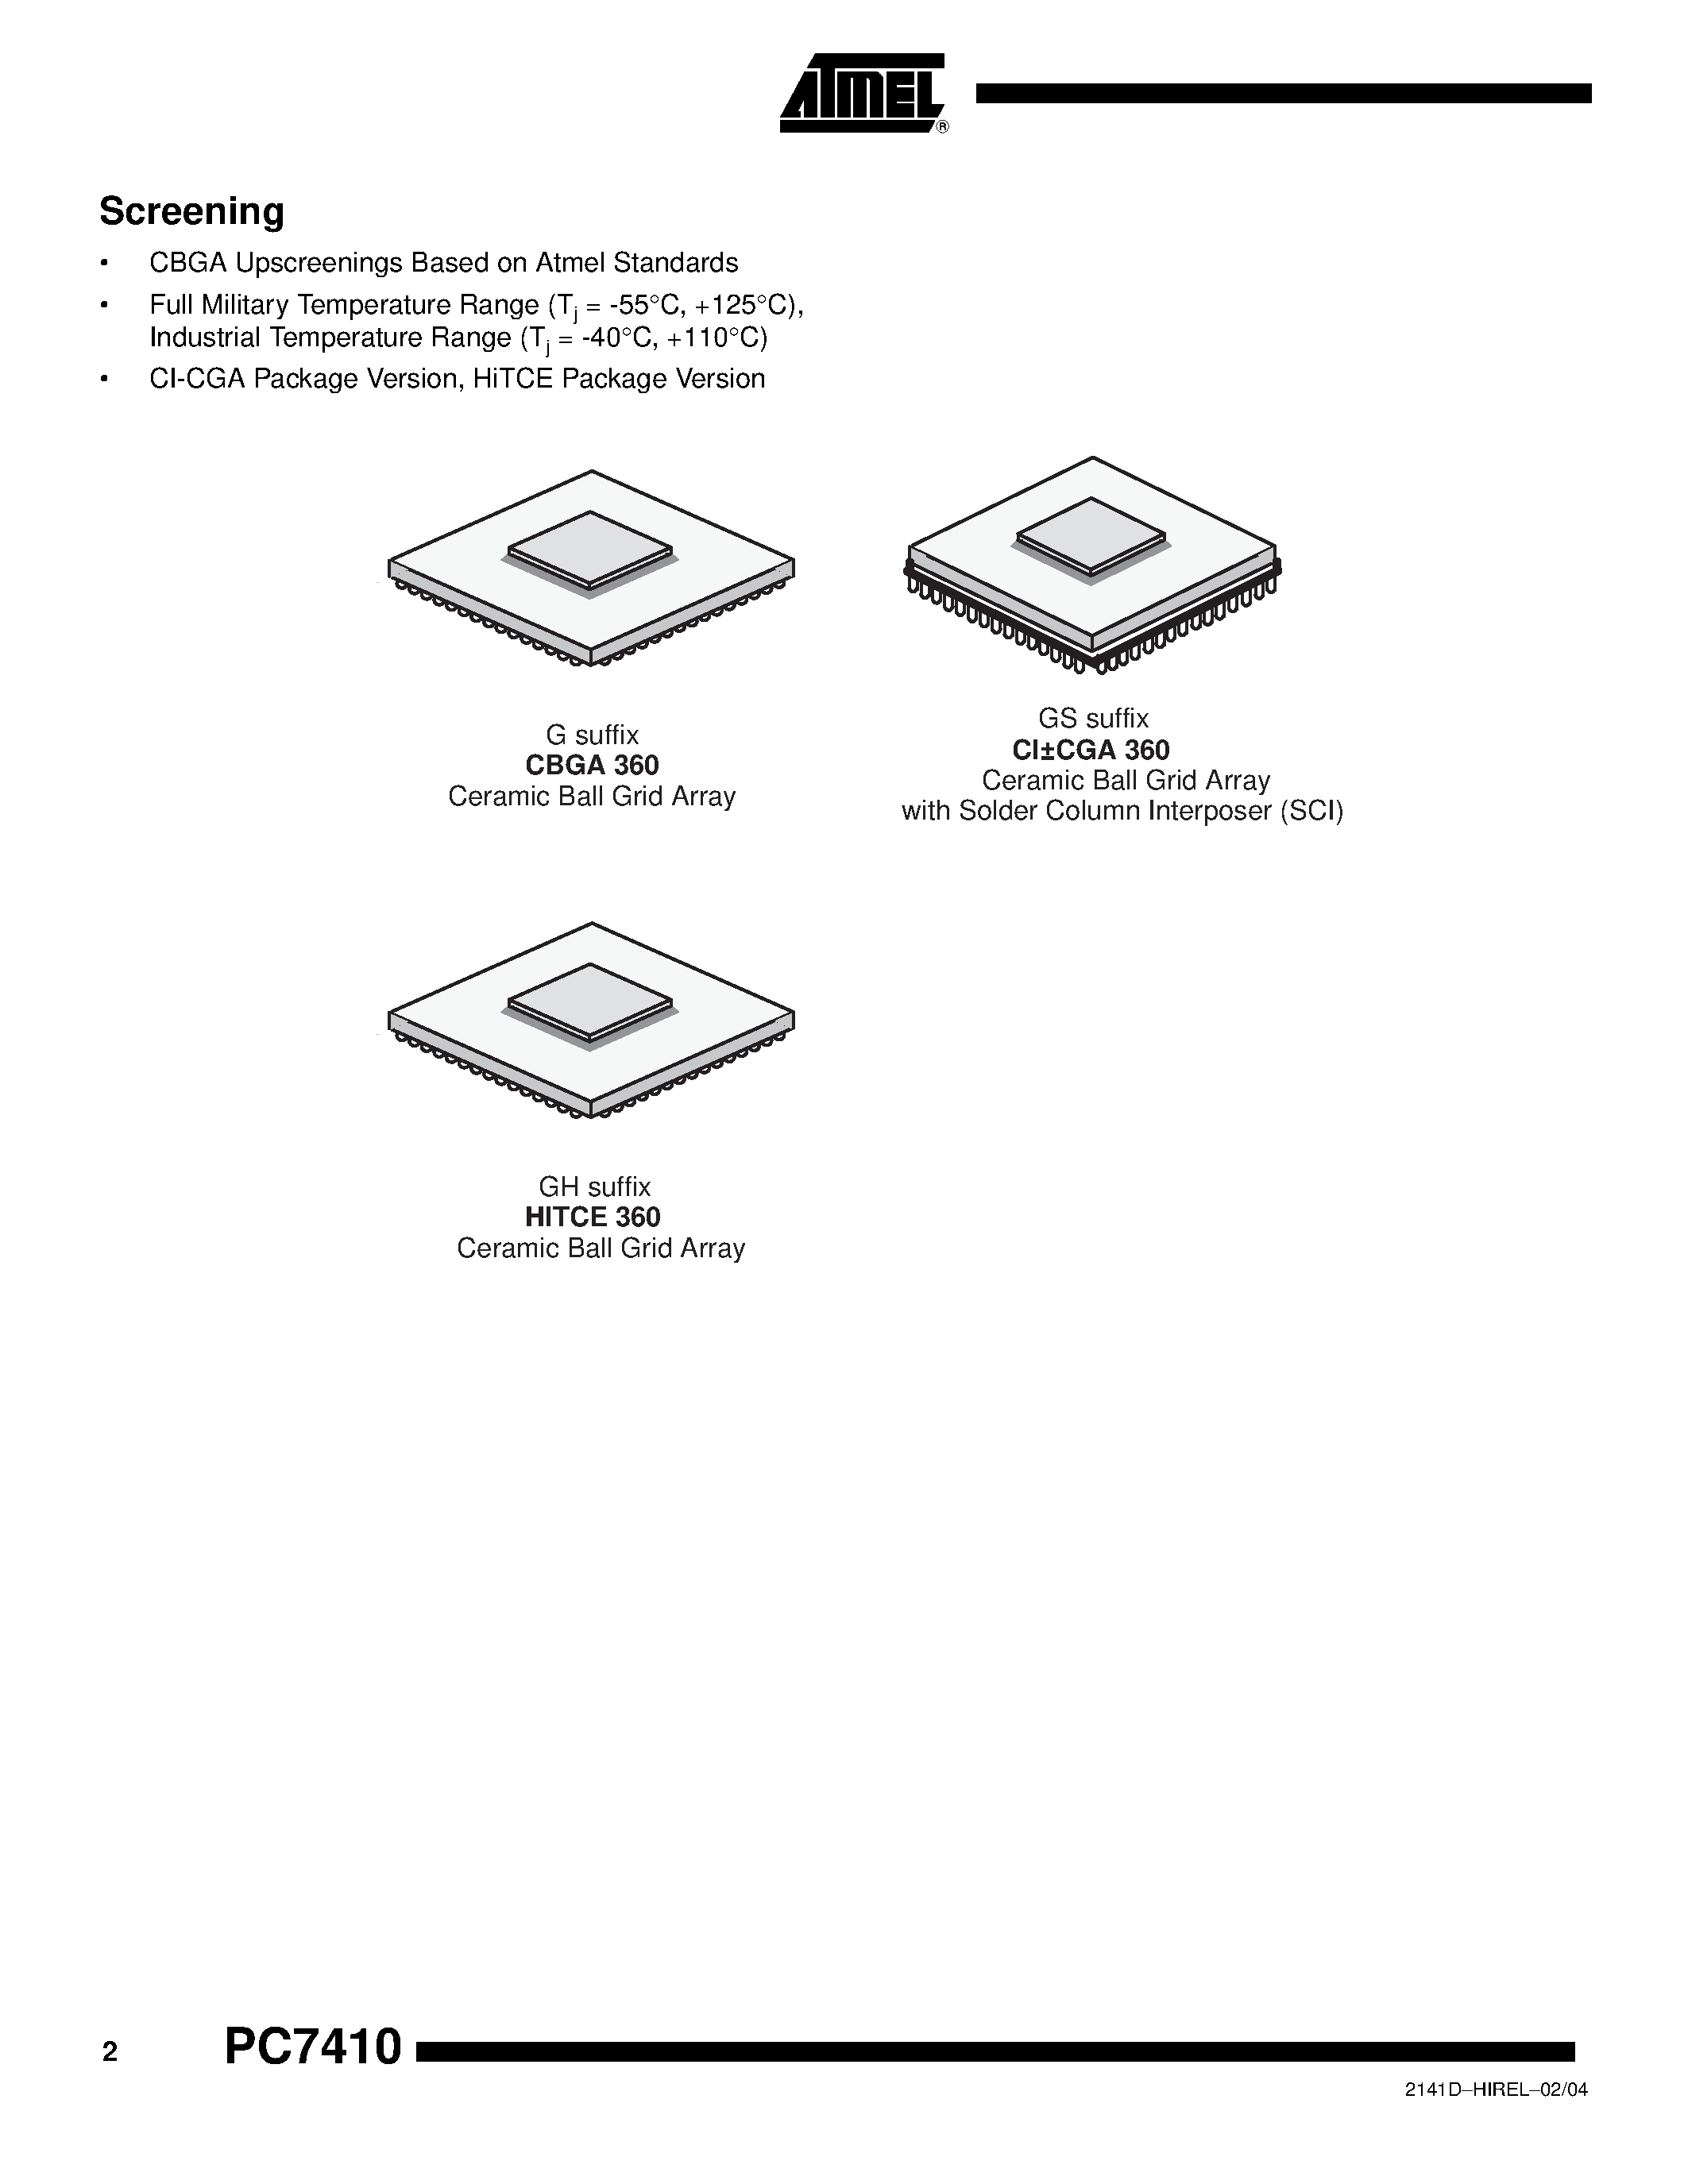 Datasheet PC7410 - PowerPC 7410 RISC Microprocessor Product Specification page 2